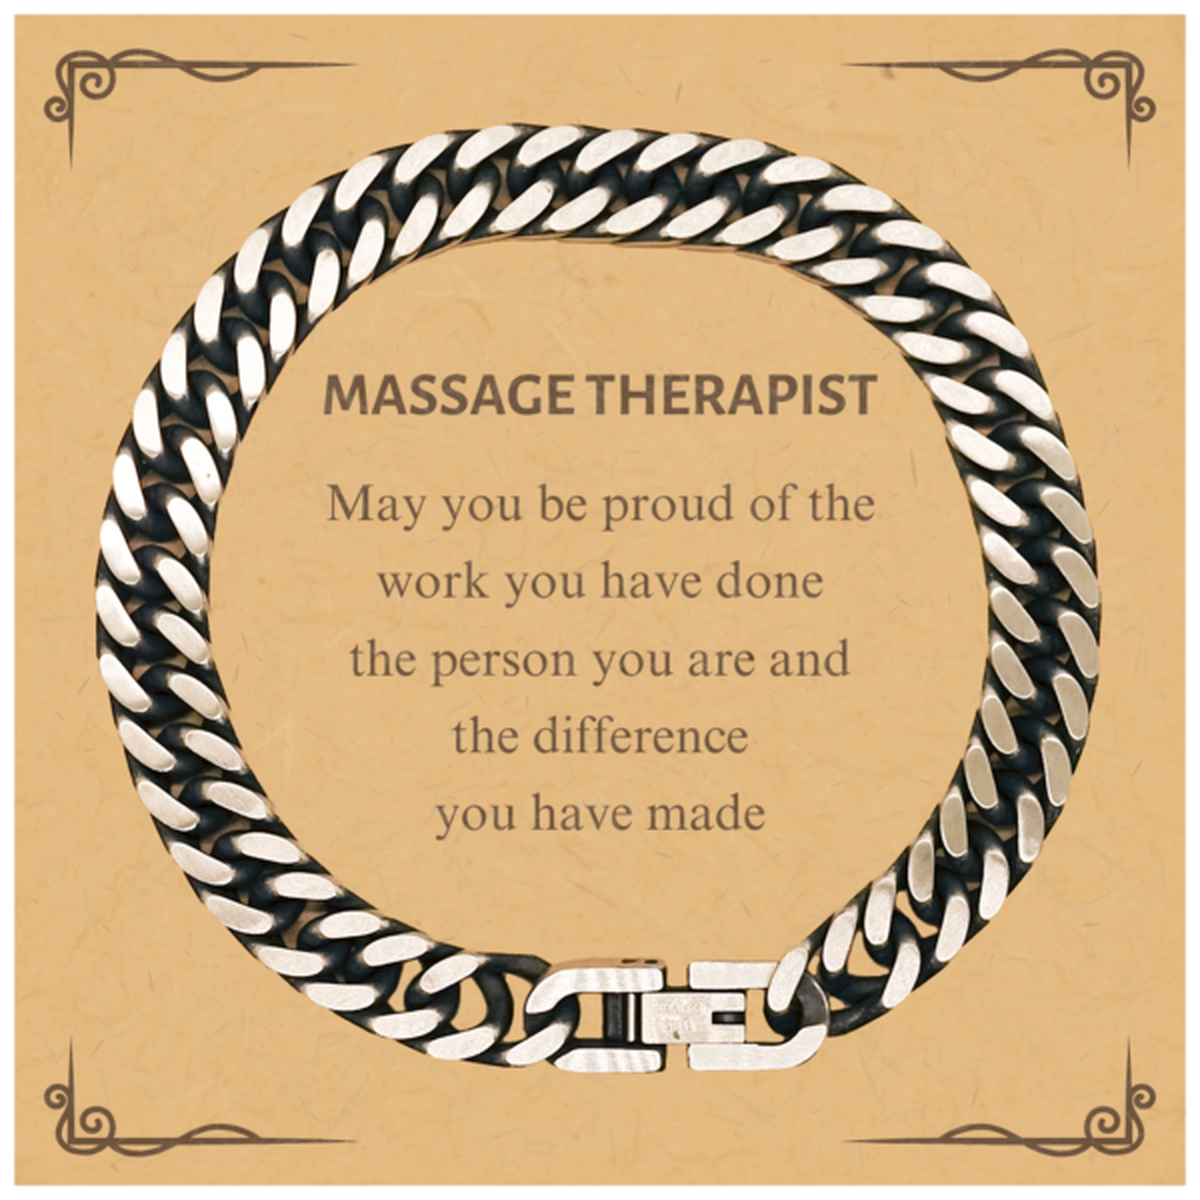 Massage Therapist May you be proud of the work you have done, Retirement Massage Therapist Cuban Link Chain Bracelet for Colleague Appreciation Gifts Amazing for Massage Therapist